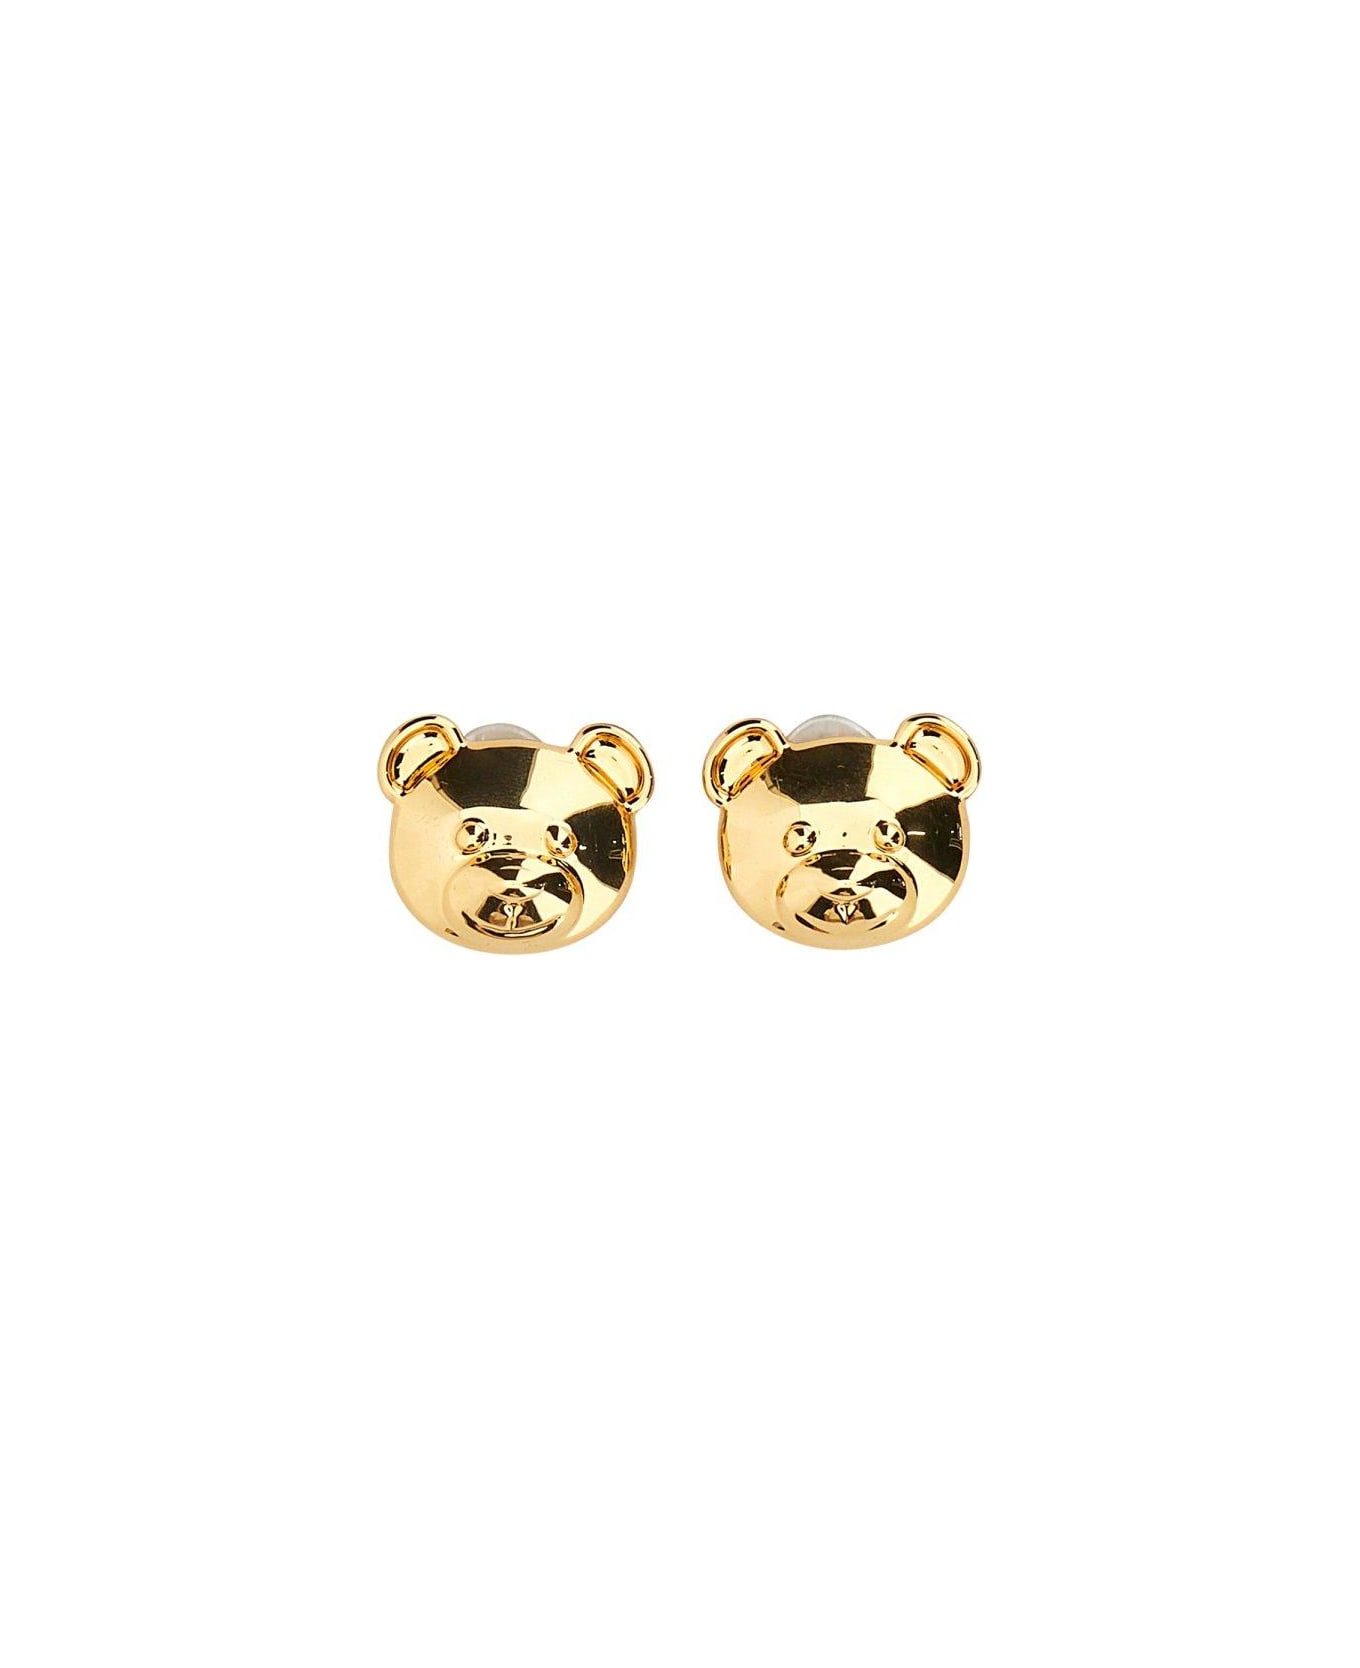 Moschino Teddy Bear Engraved Clip-on Earrings - GOLD イヤリング